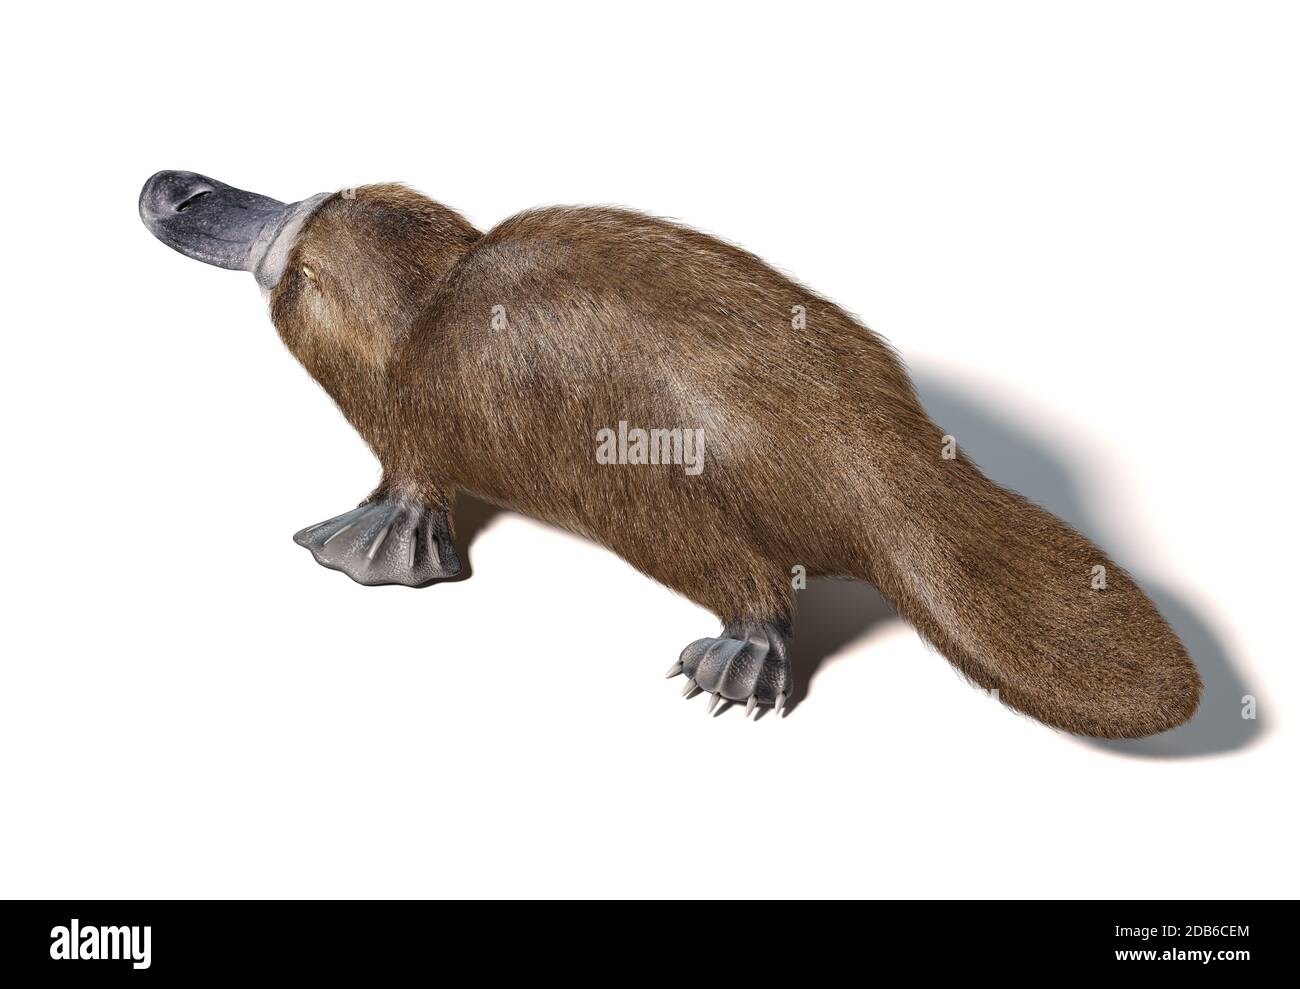 Semi-aquatic mammal, native in eastern Australia. Viewed from above. On white background with drop shadow. Stock Photo